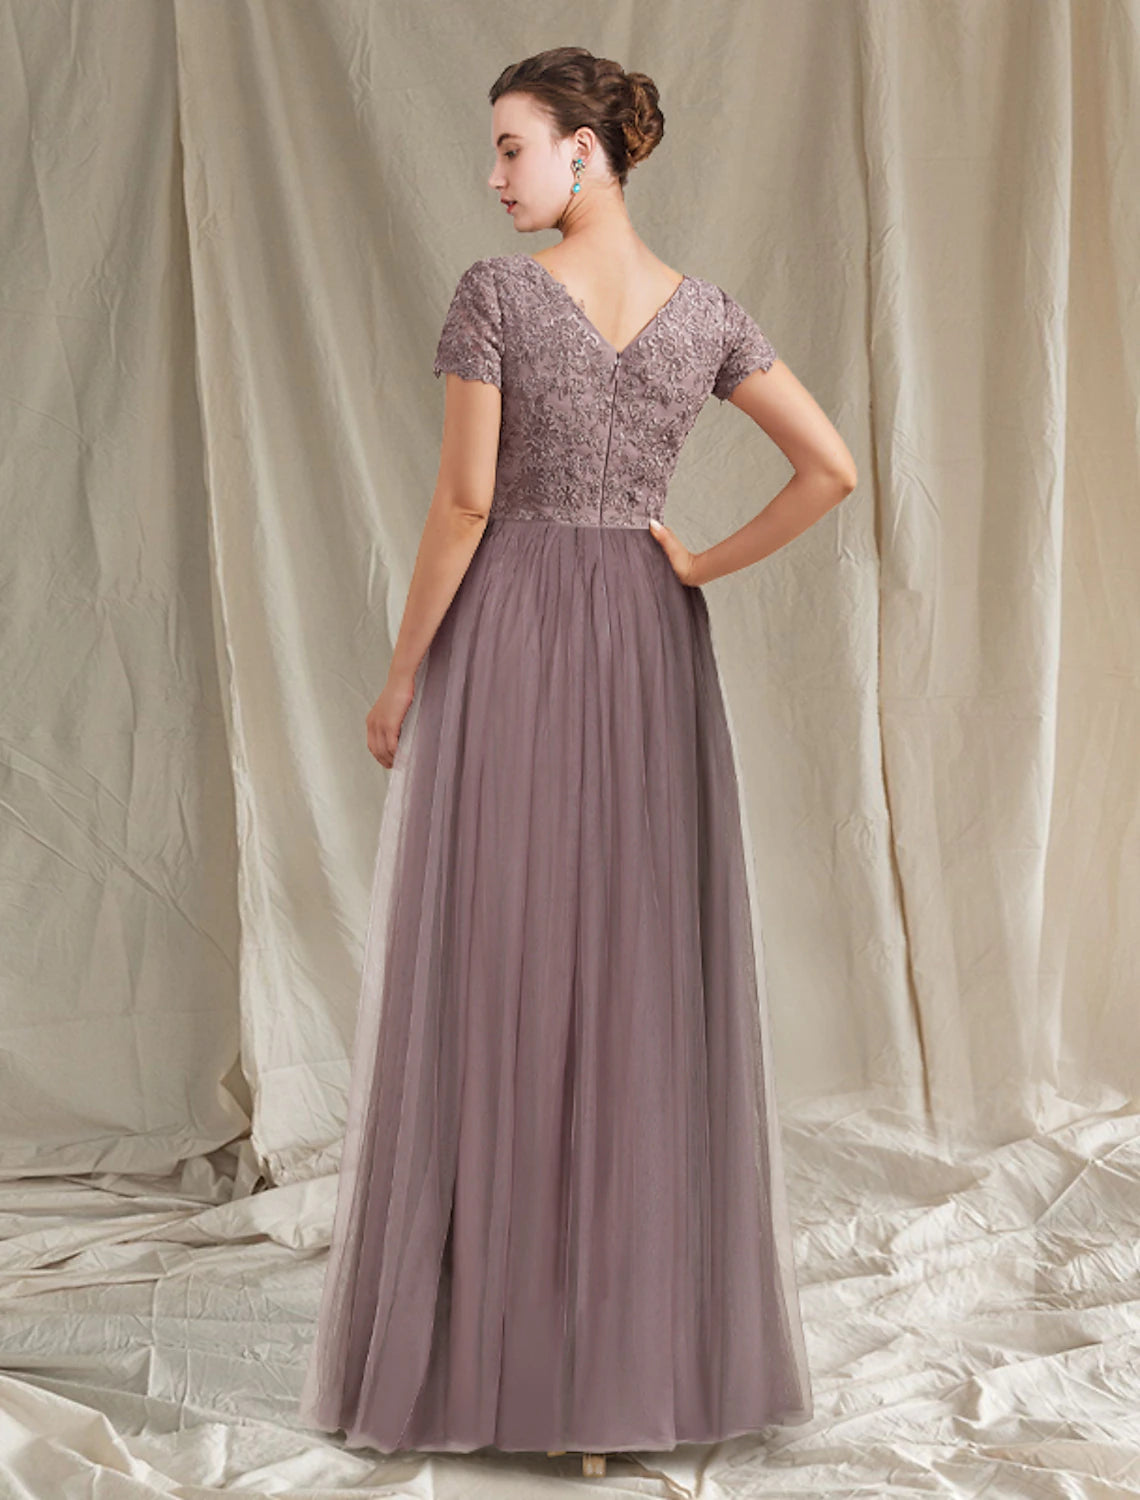 A-Line Mother of the Bride Dress Luxurious Elegant Jewel Neck Floor Length Lace Tulle Short Sleeve with Pleats Appliques